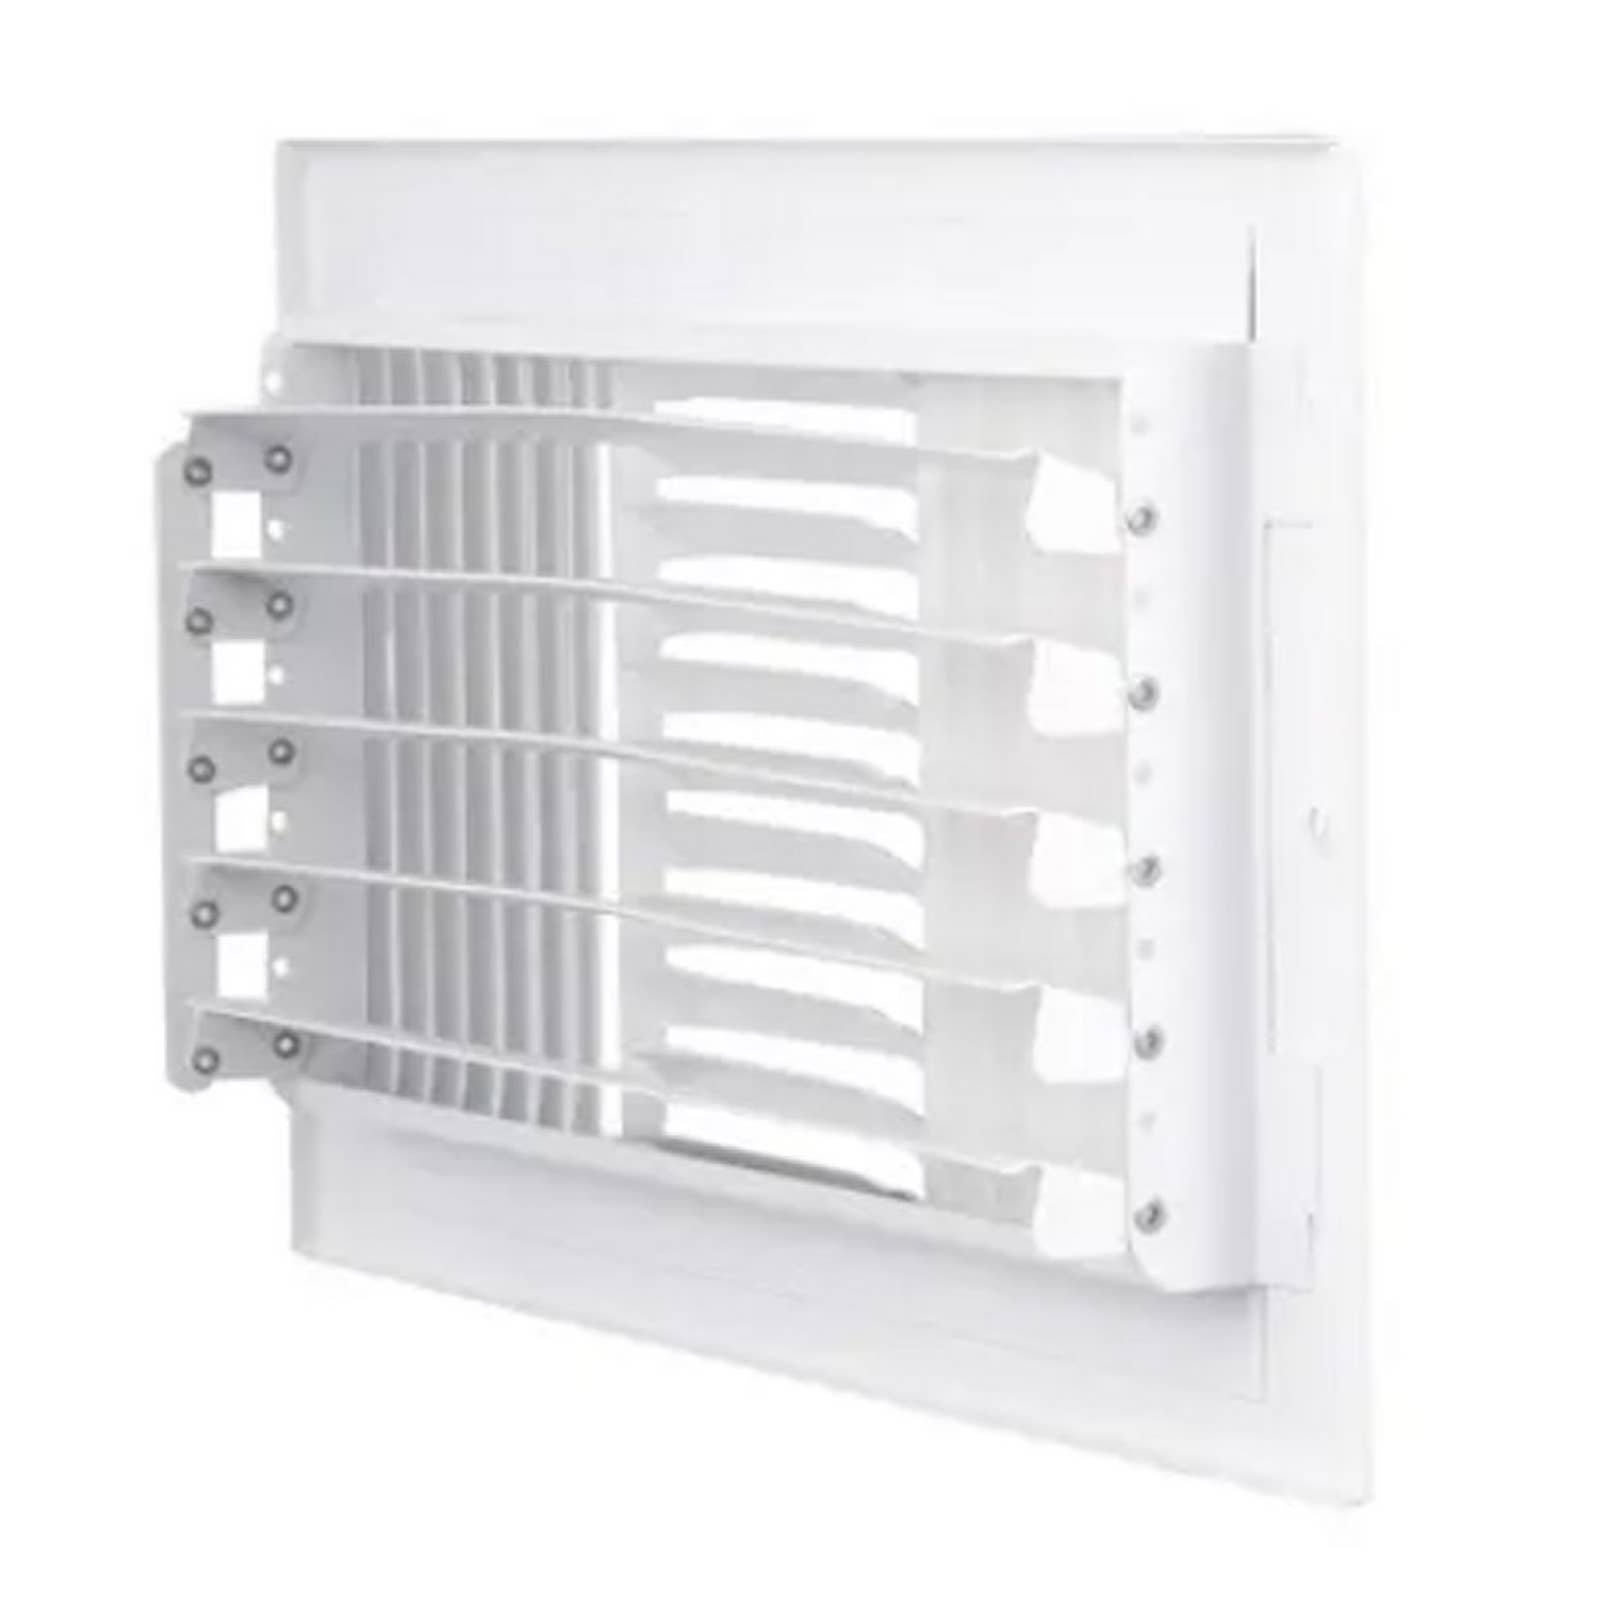 12 in. x 6 in. 3-Way Steel Wall or Ceiling Register Vent, White - Free Shipping G4MQShi9I